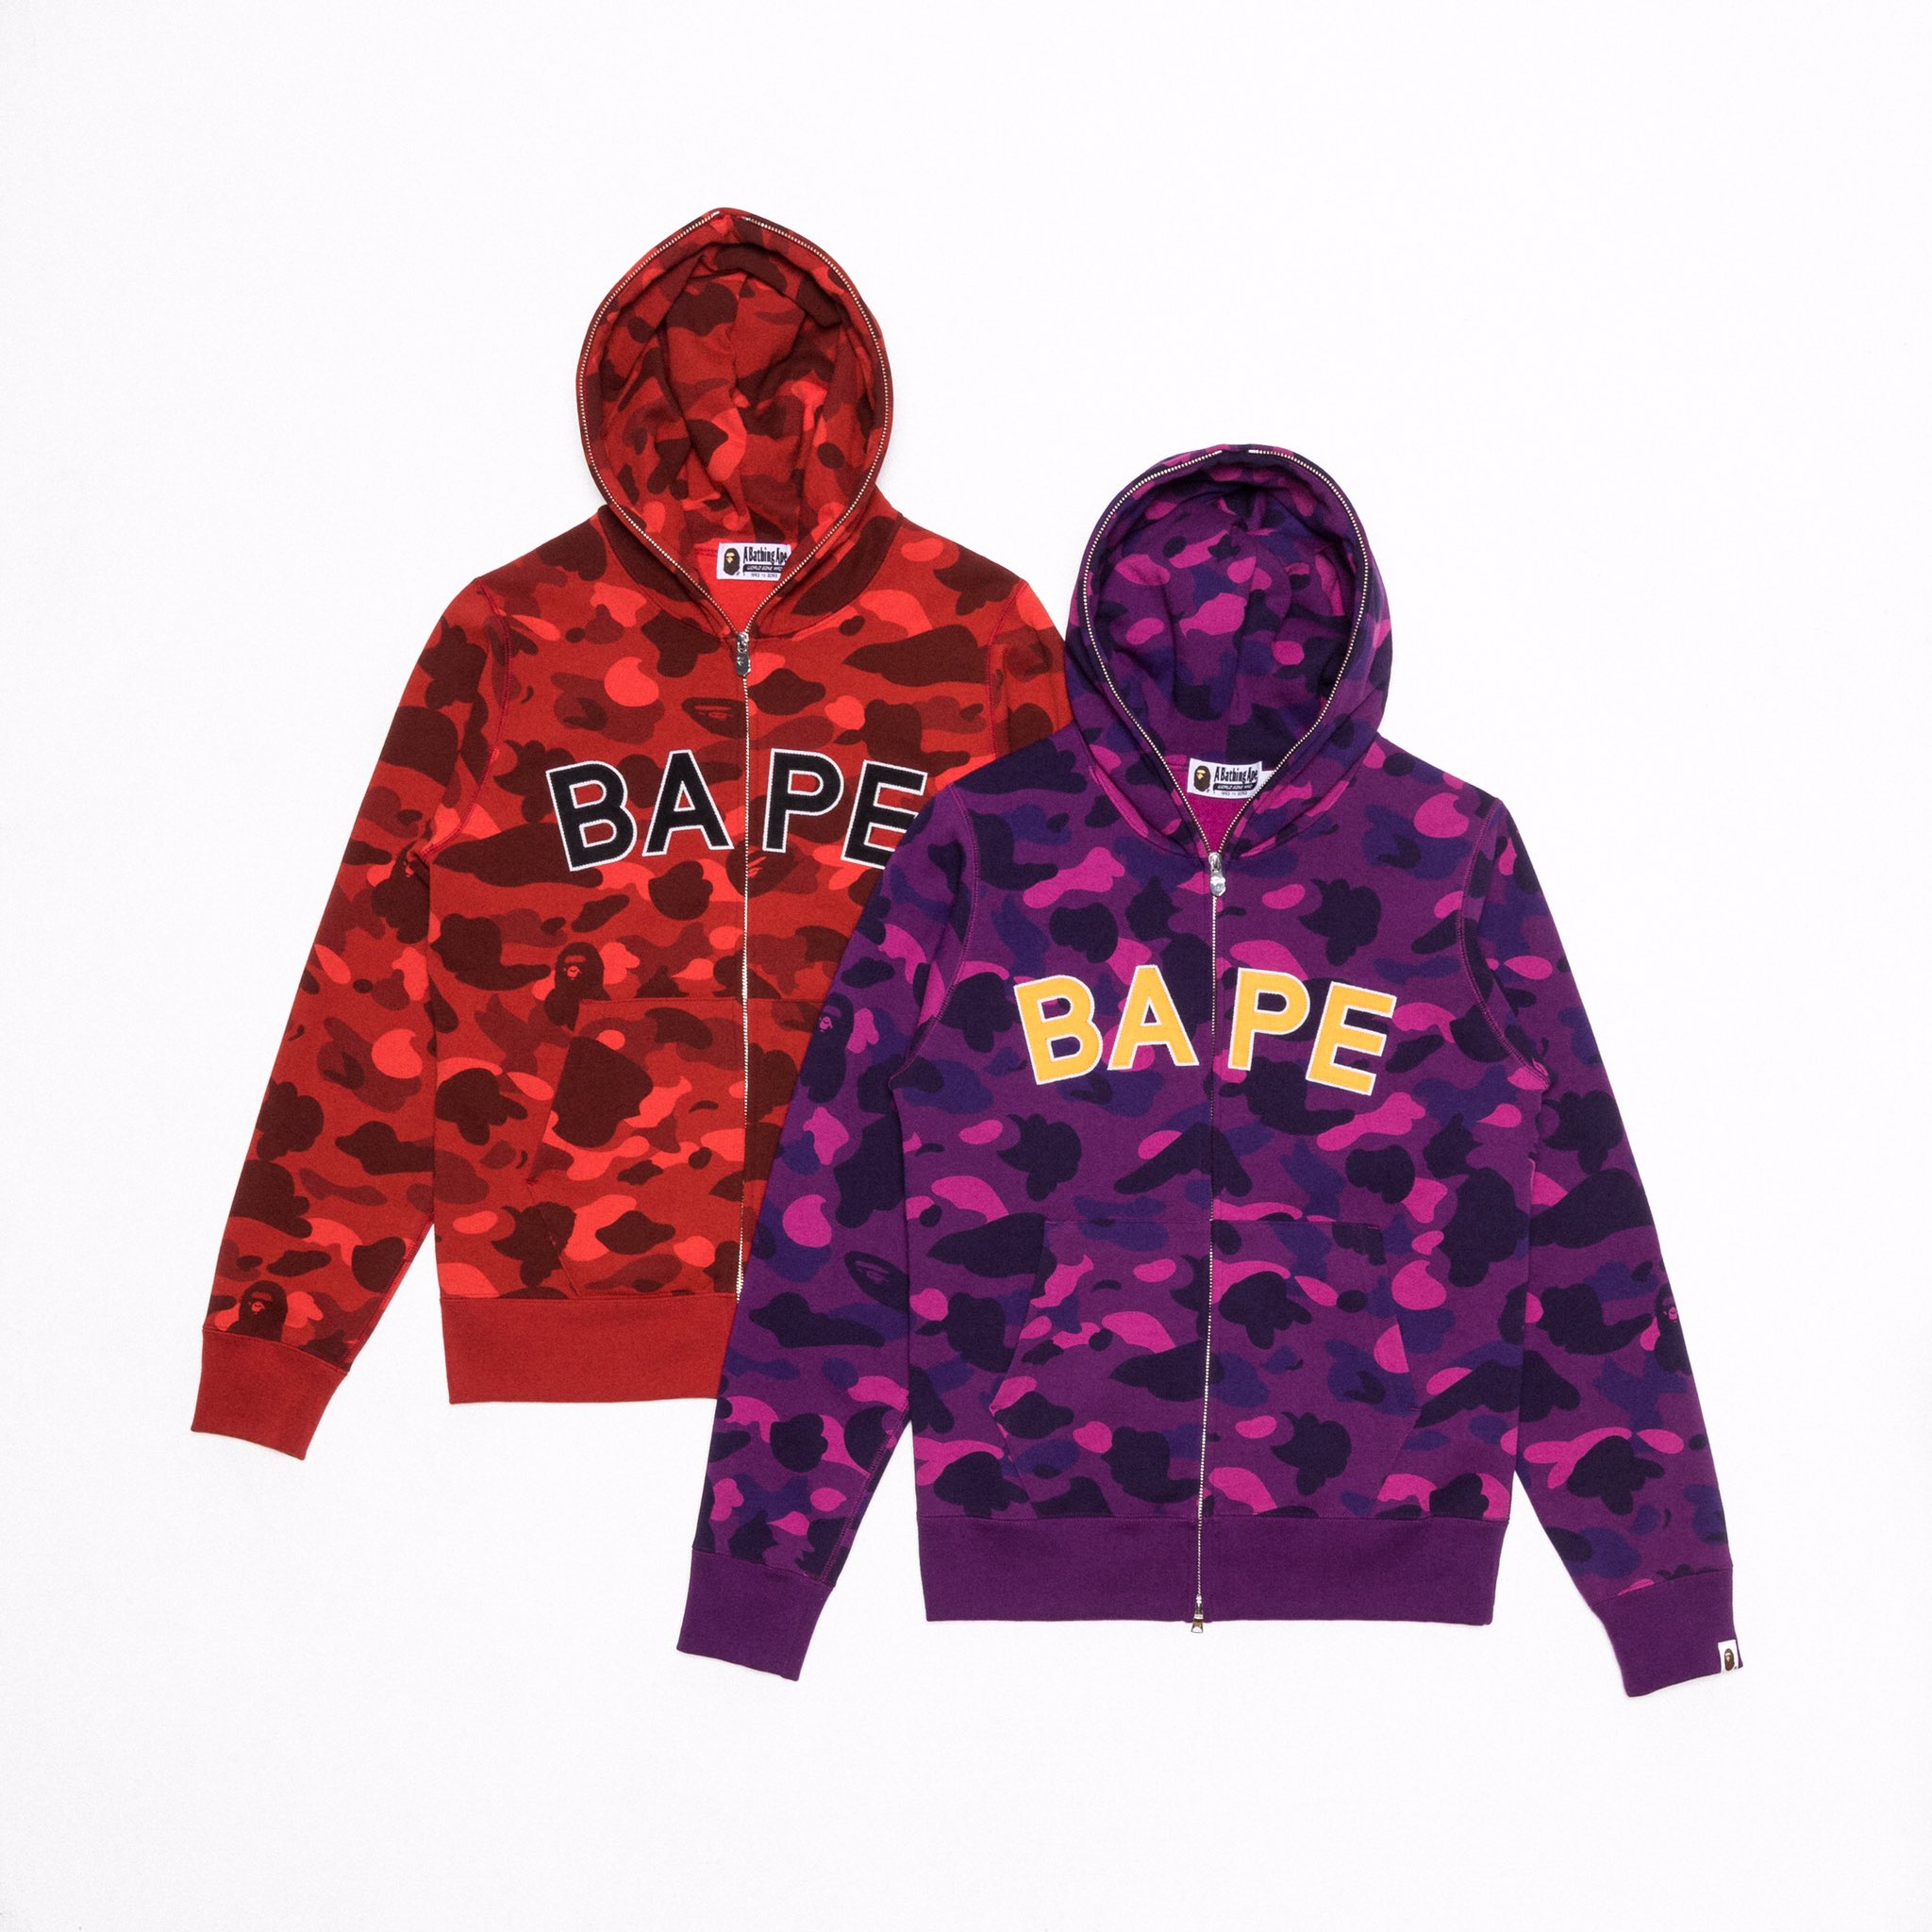 UNDEFEATED on Twitter: "A BATHING APE® Color Camo Bape Full Zip Hoodie and  1st Camo Bucket Hat // Available Sunday 4/19 at https://t.co/rPhV7ZP2Fc  https://t.co/JPWRE1p60O" / Twitter